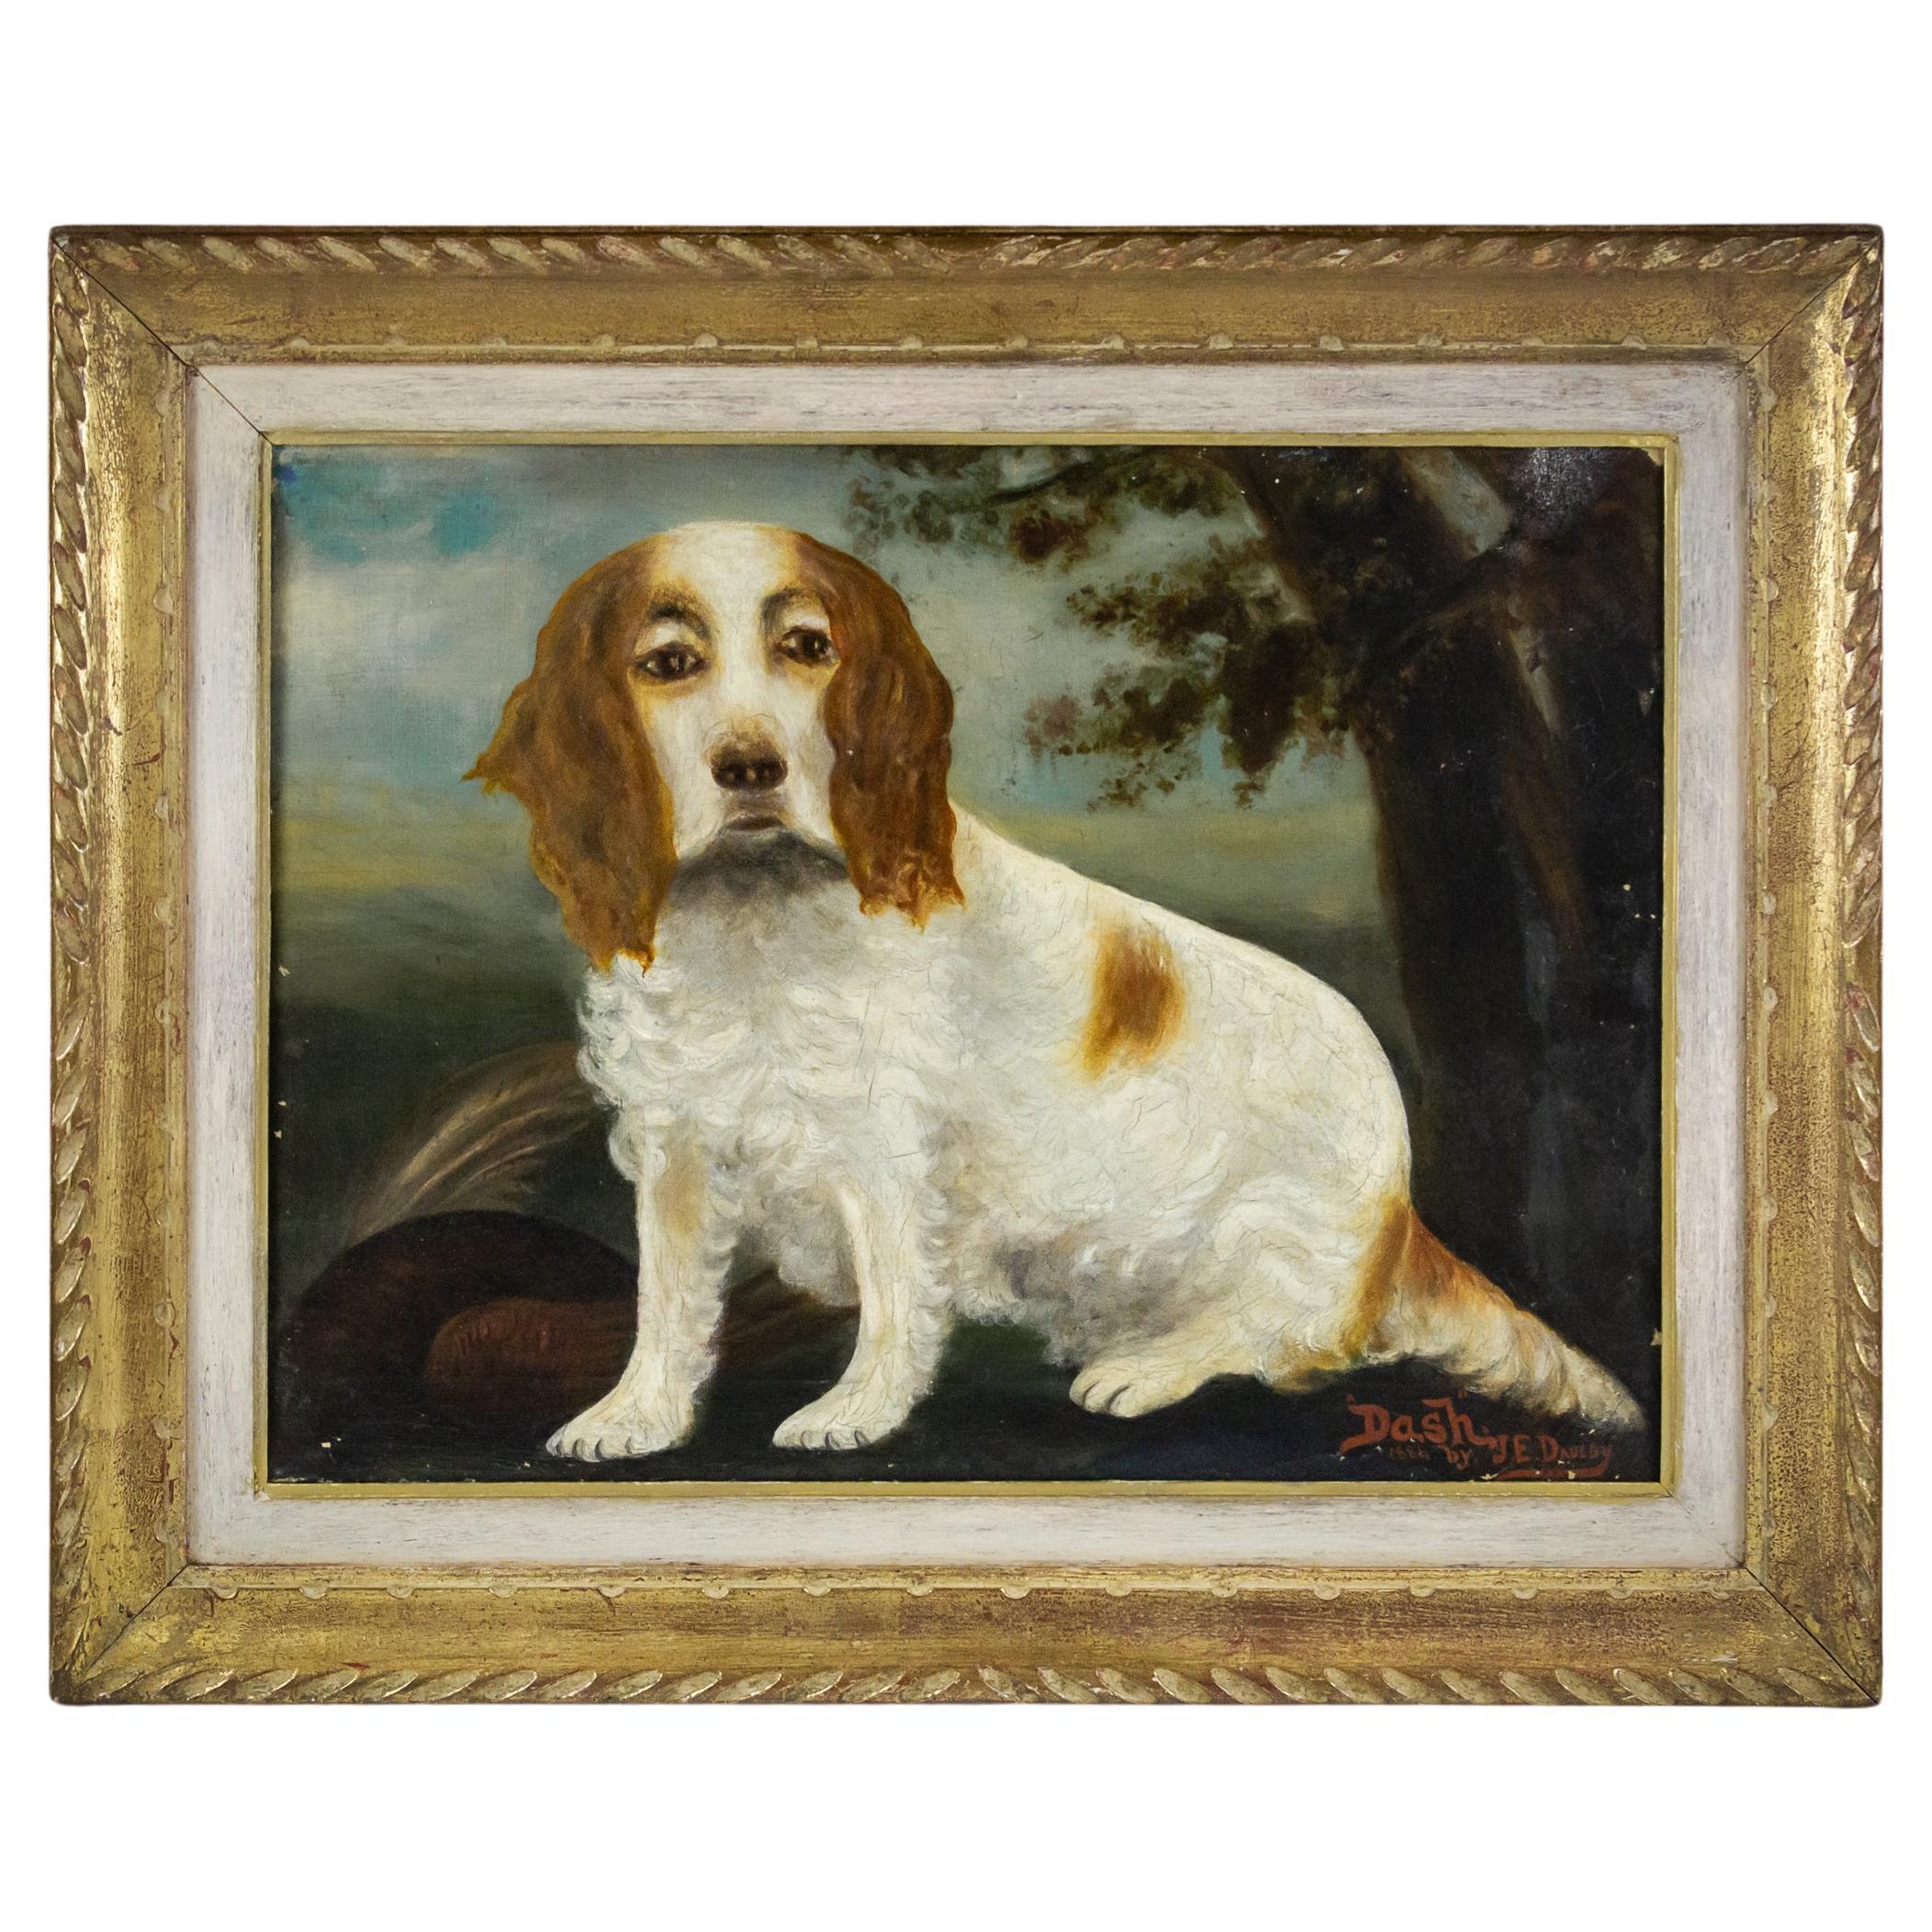 Late 19th Century Primitive Oil on Canvas Portrait of "Dash" Clumber Spaniel For Sale